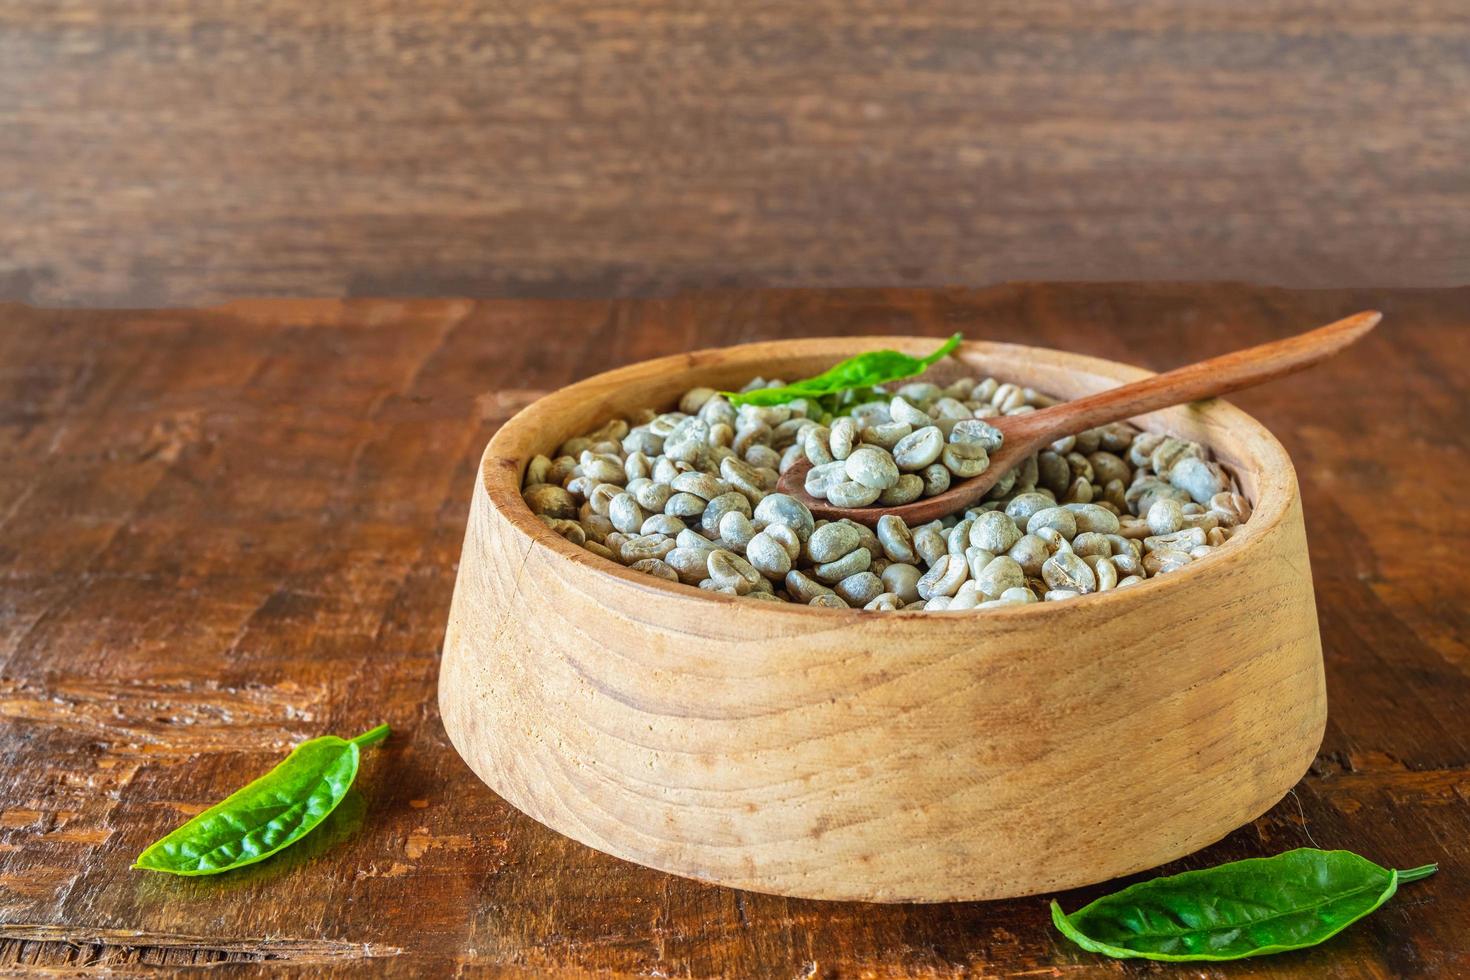 unroasted green coffee beans in a wooden bowl photo